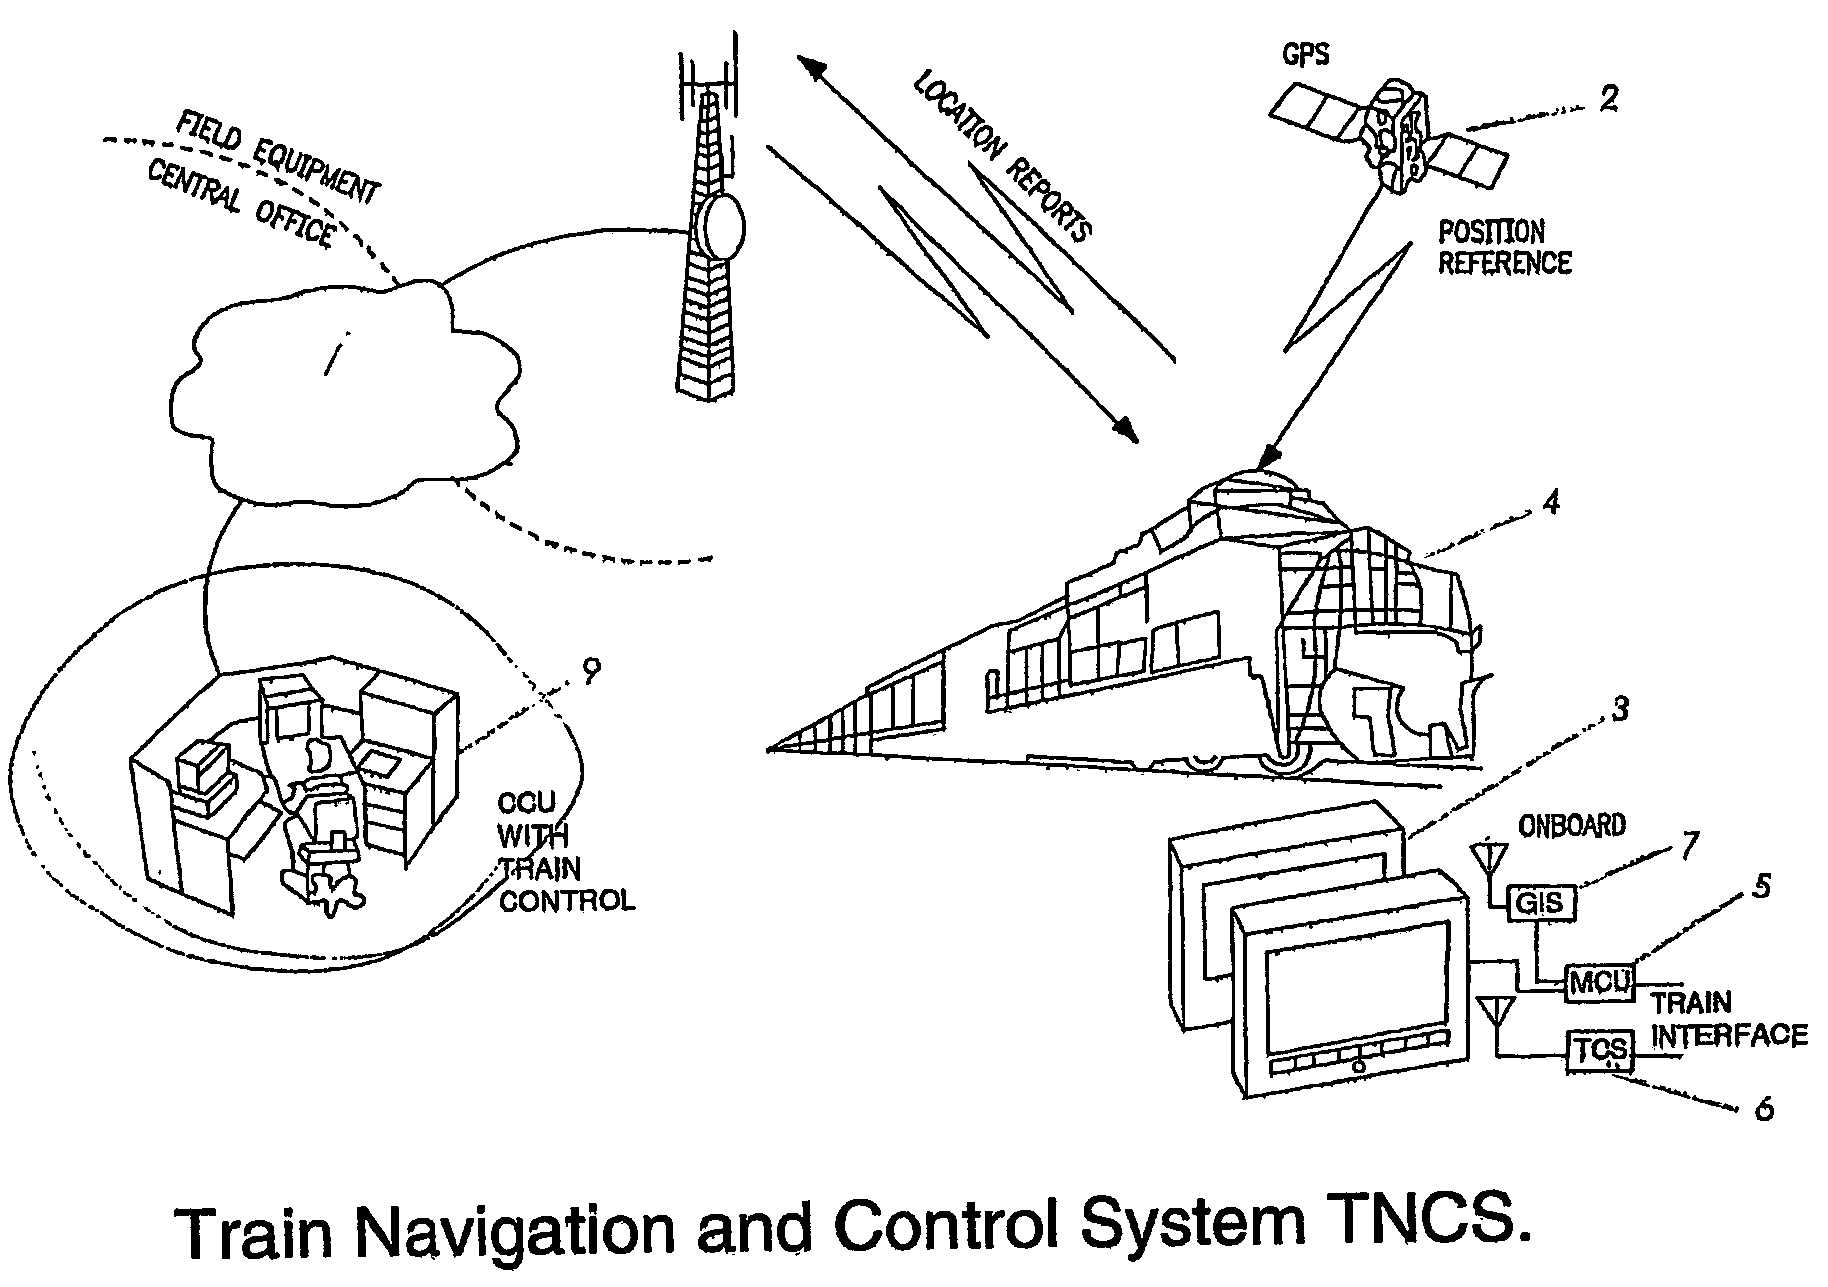 Vehicle navigation, collision avoidance and control system